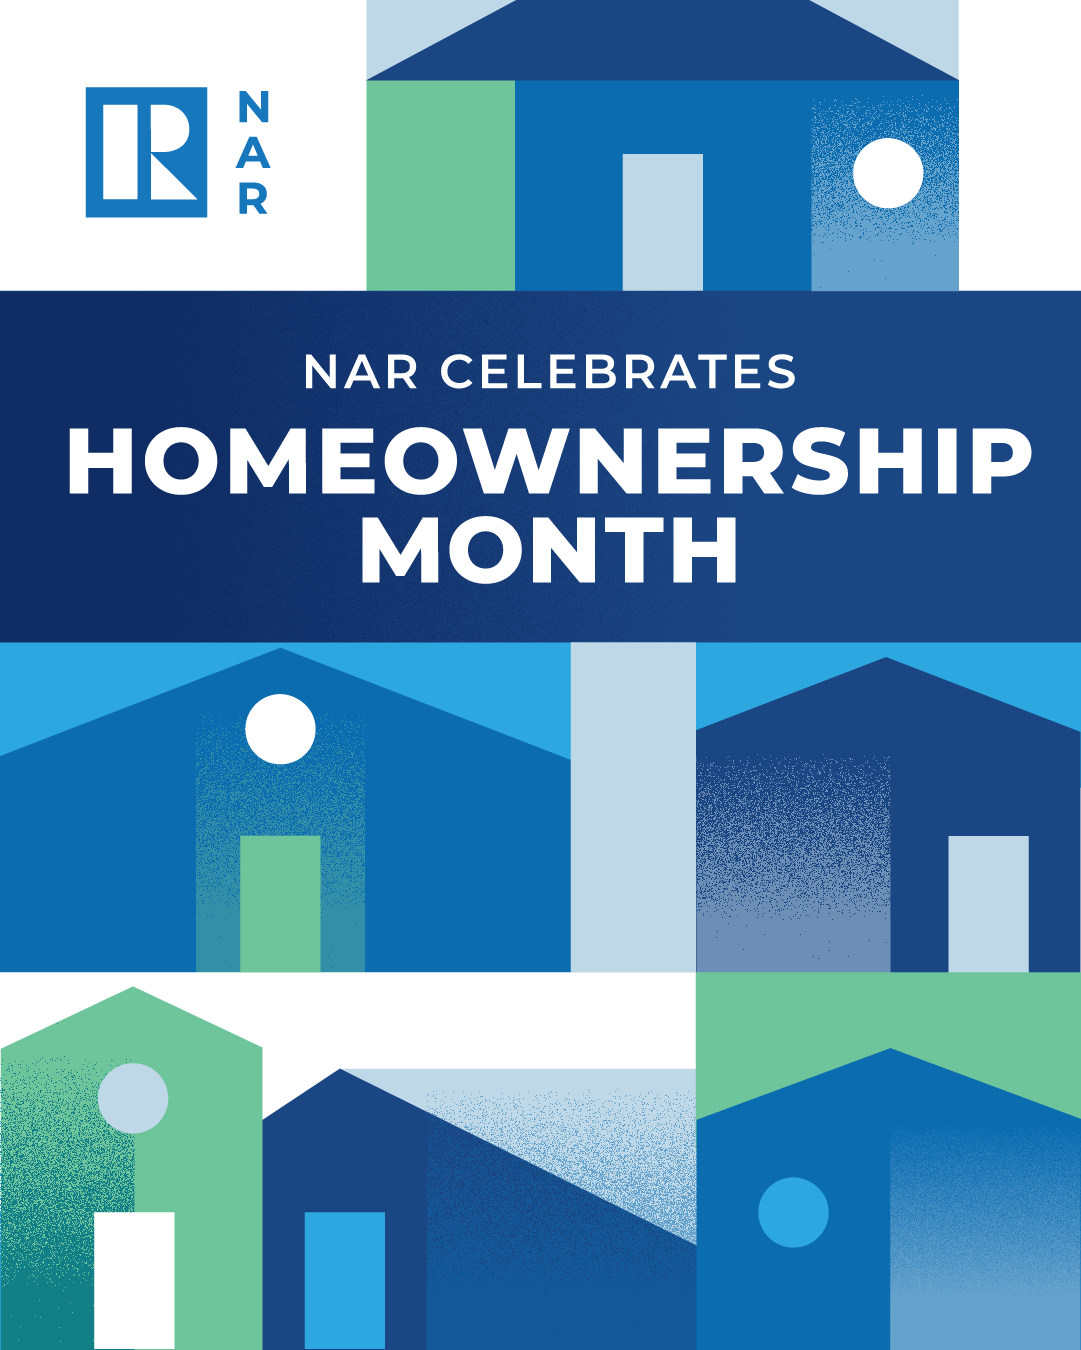 June Is National Homeownership Month Creating opportunities for future